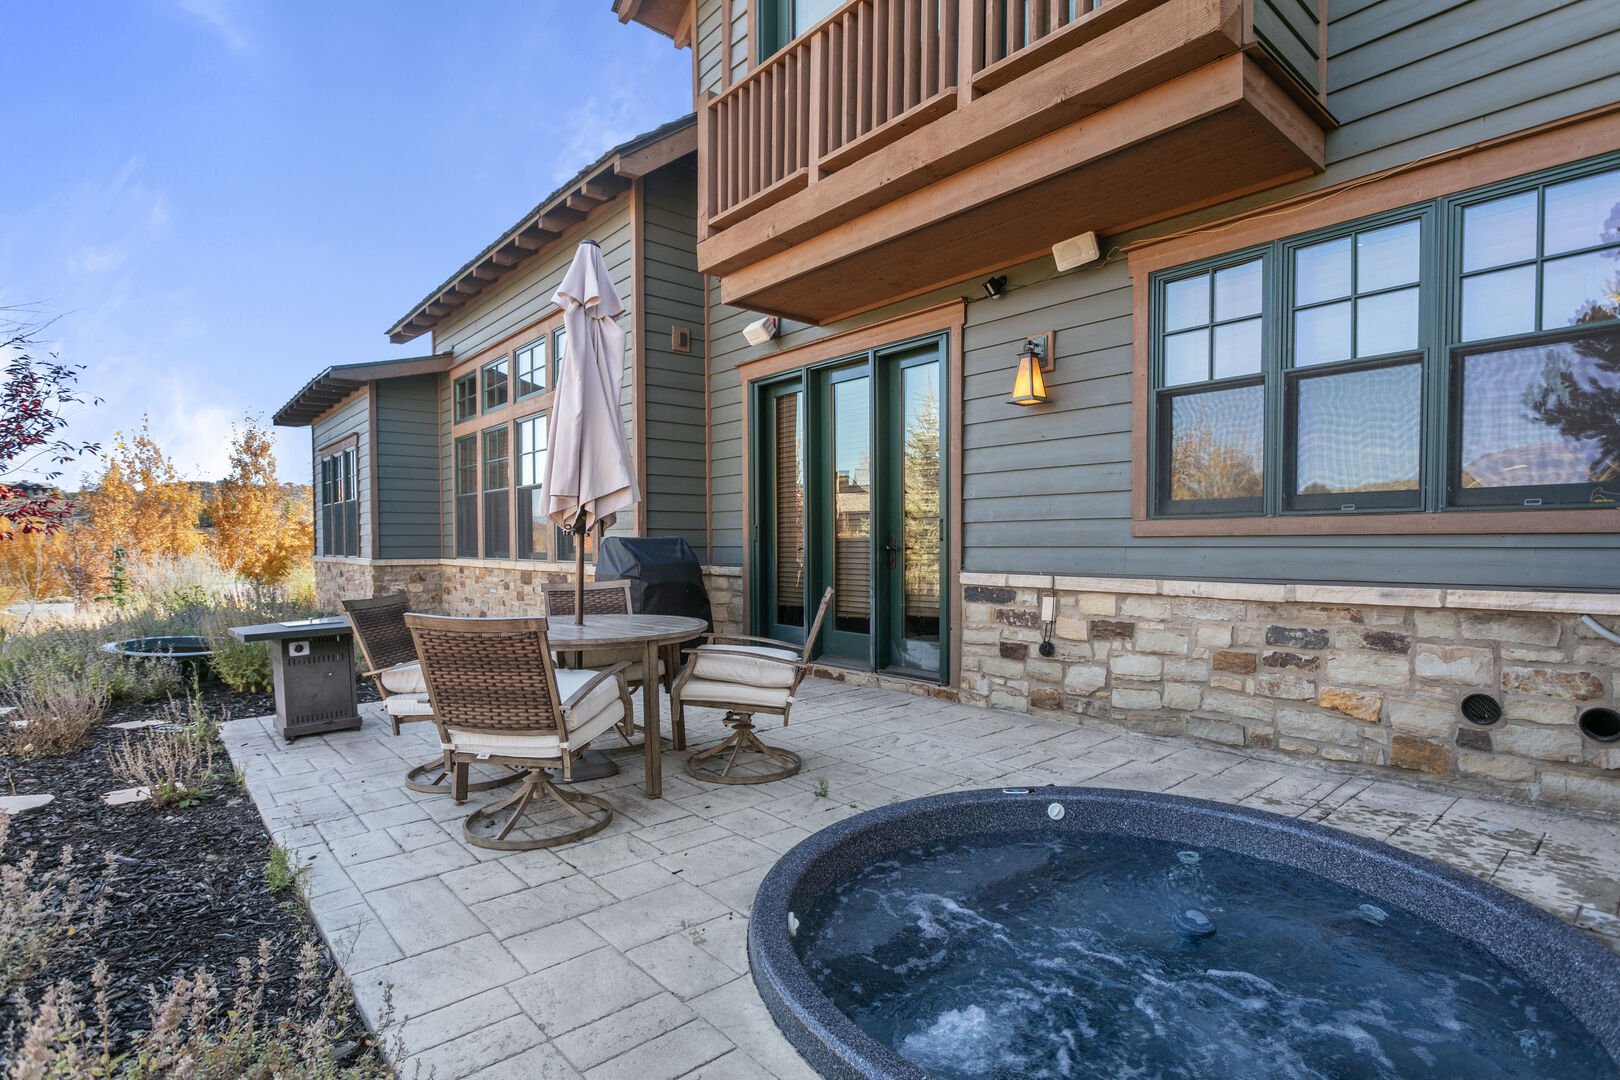 Charming patio with private hot tub, outdoor dining table, and BBQ grill.